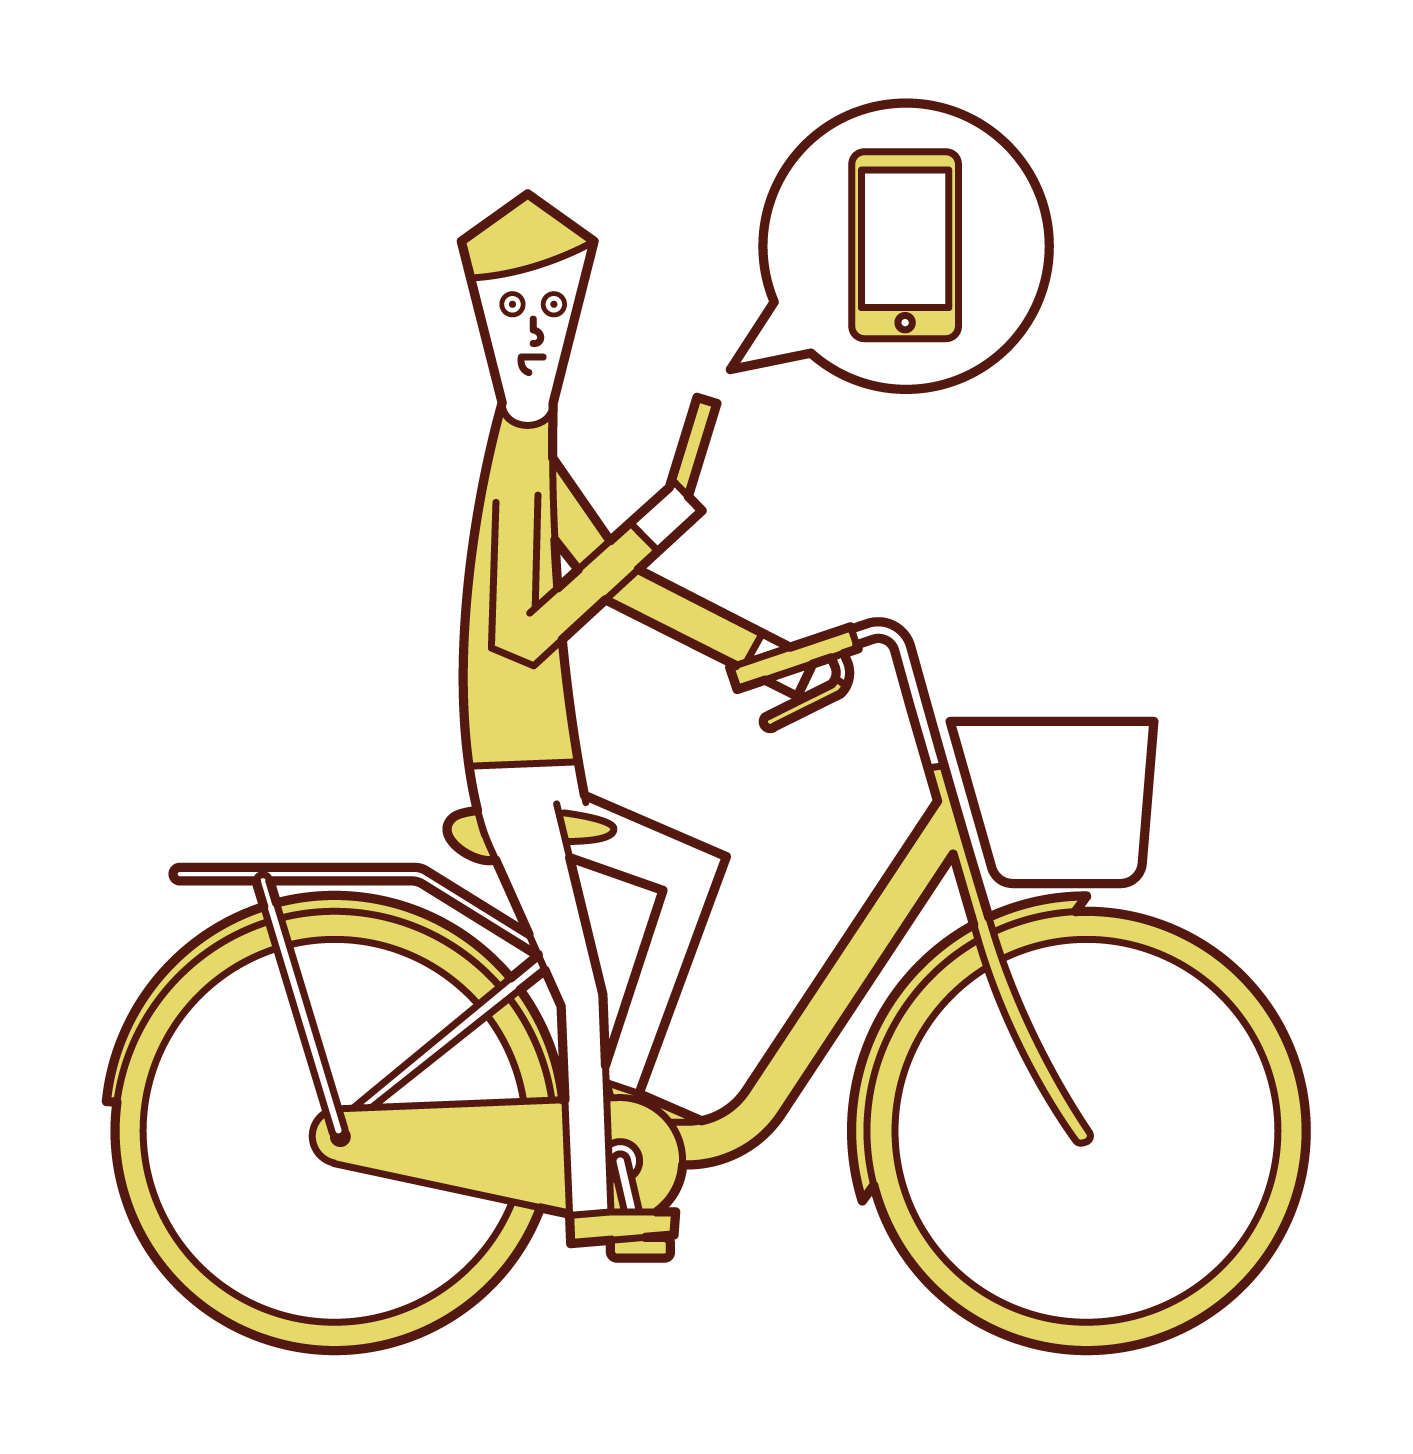 Illustration of a man driving a bicycle while using a smartphone